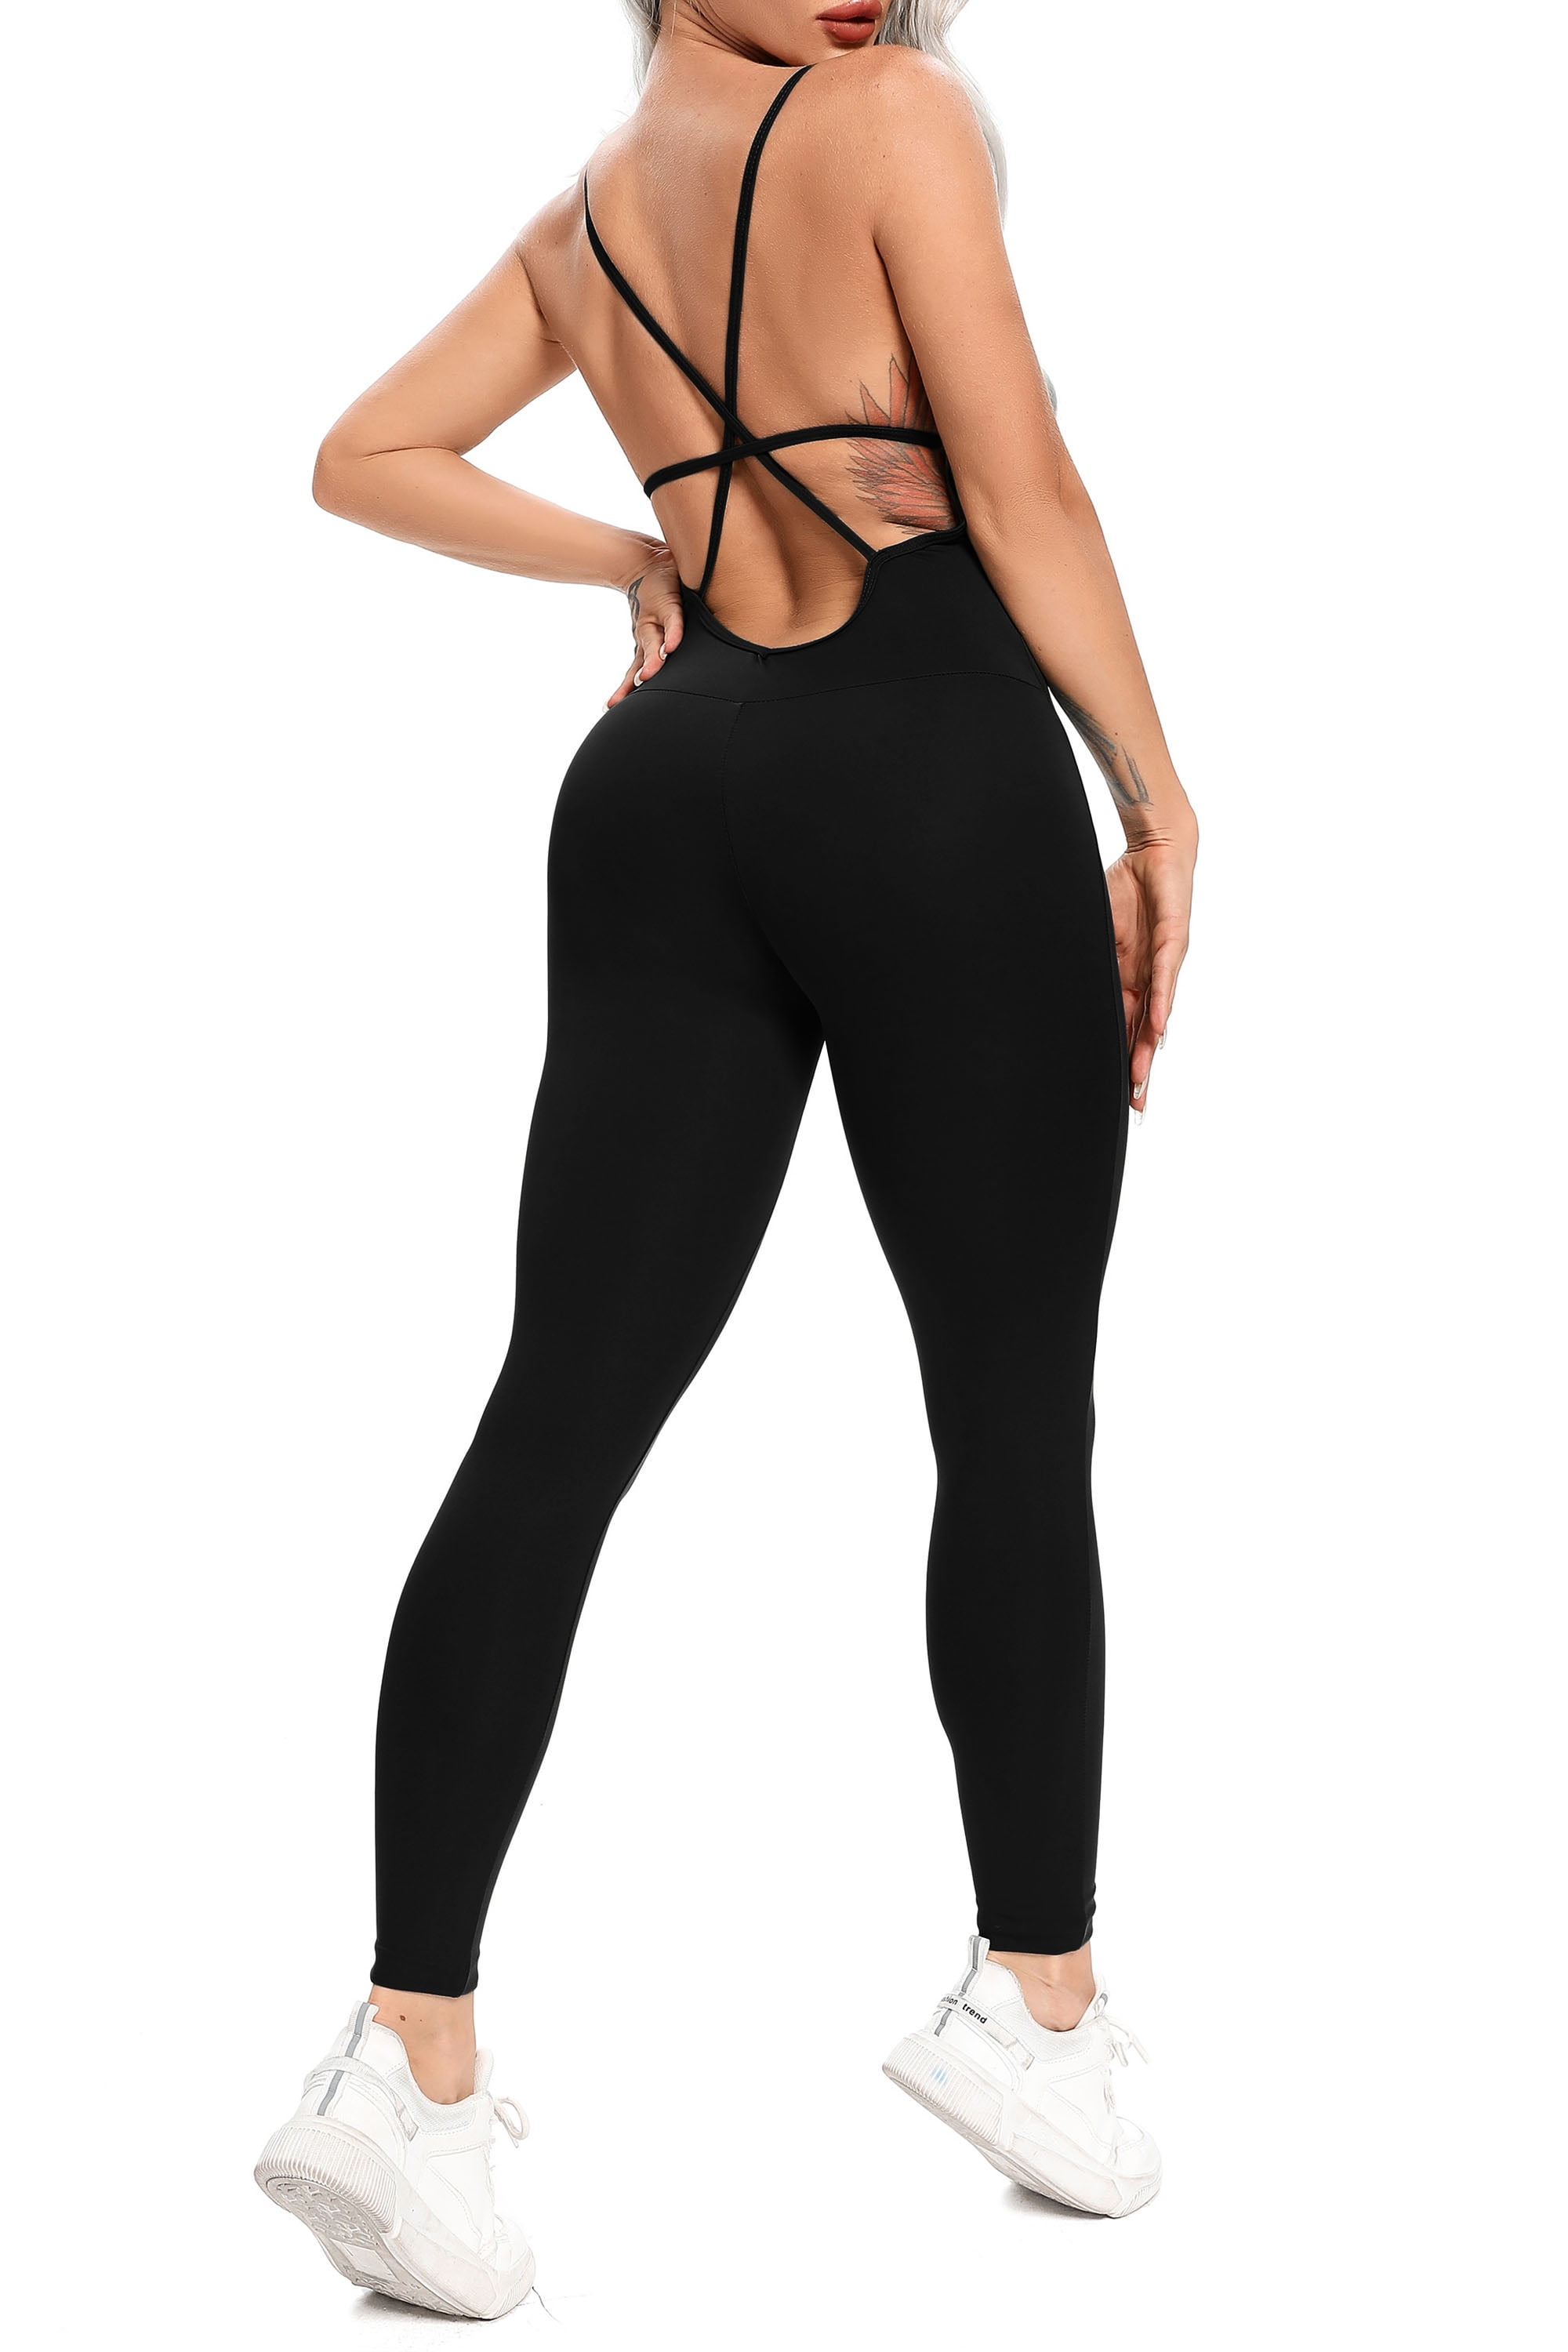 FITTOO Women Jumpsuits Criss Cross Back Bodysuit One Piece Backless Gym  Playsuit 